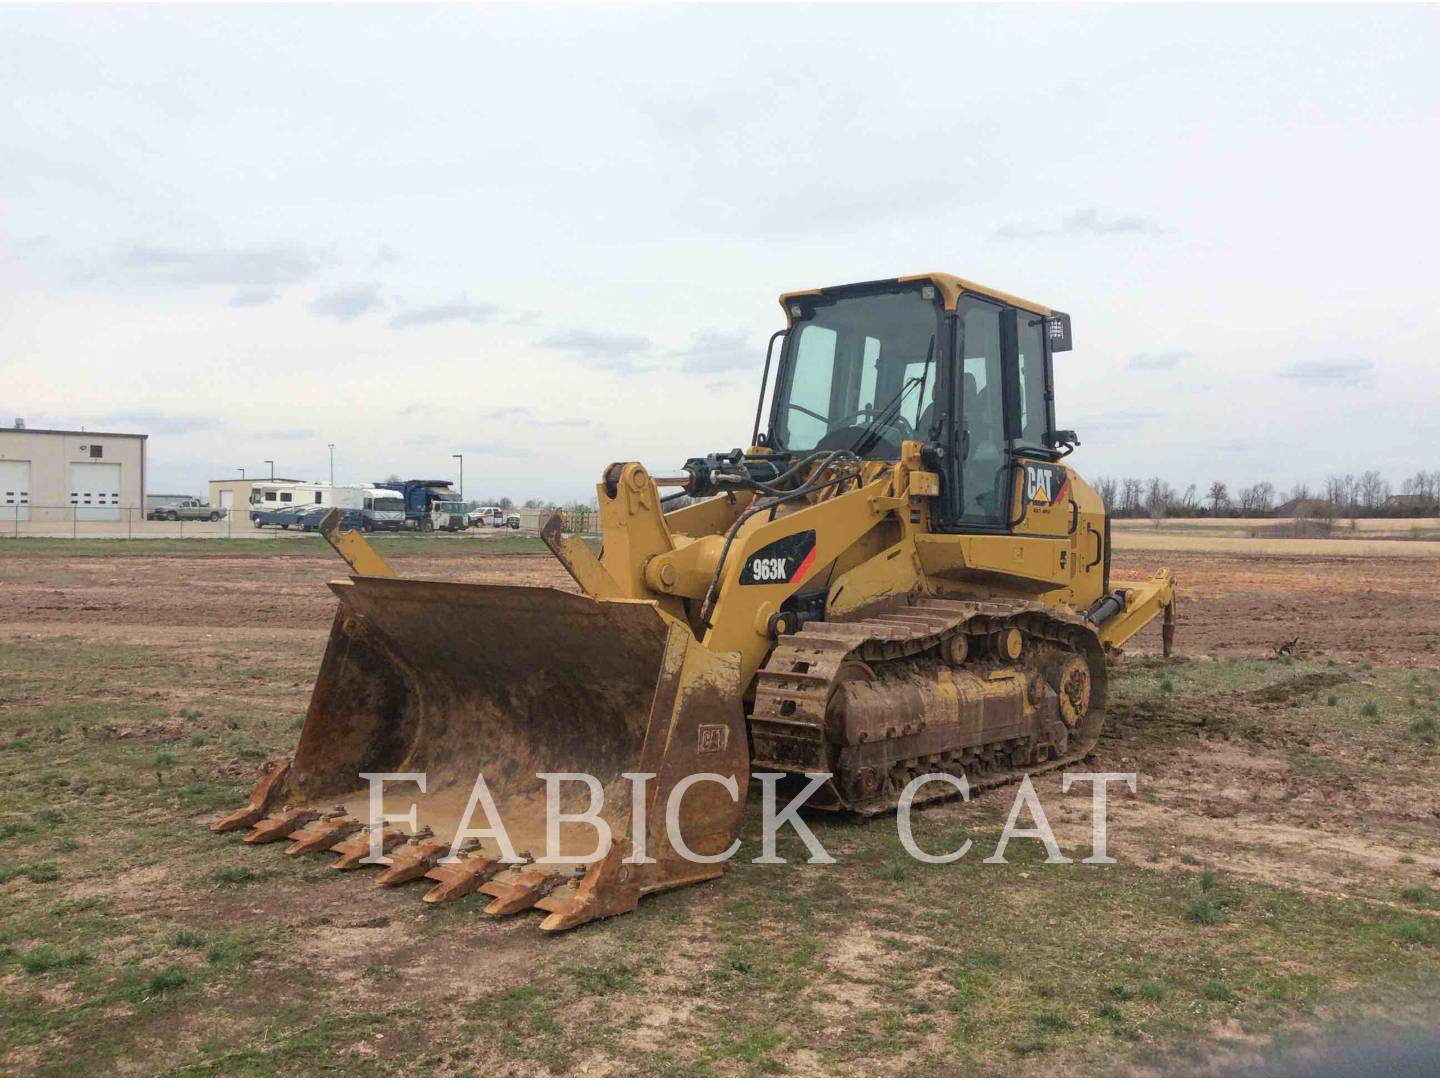 2015 Caterpillar 963K Compact Track Loader for sale in FENTON, MO |  IronSearch